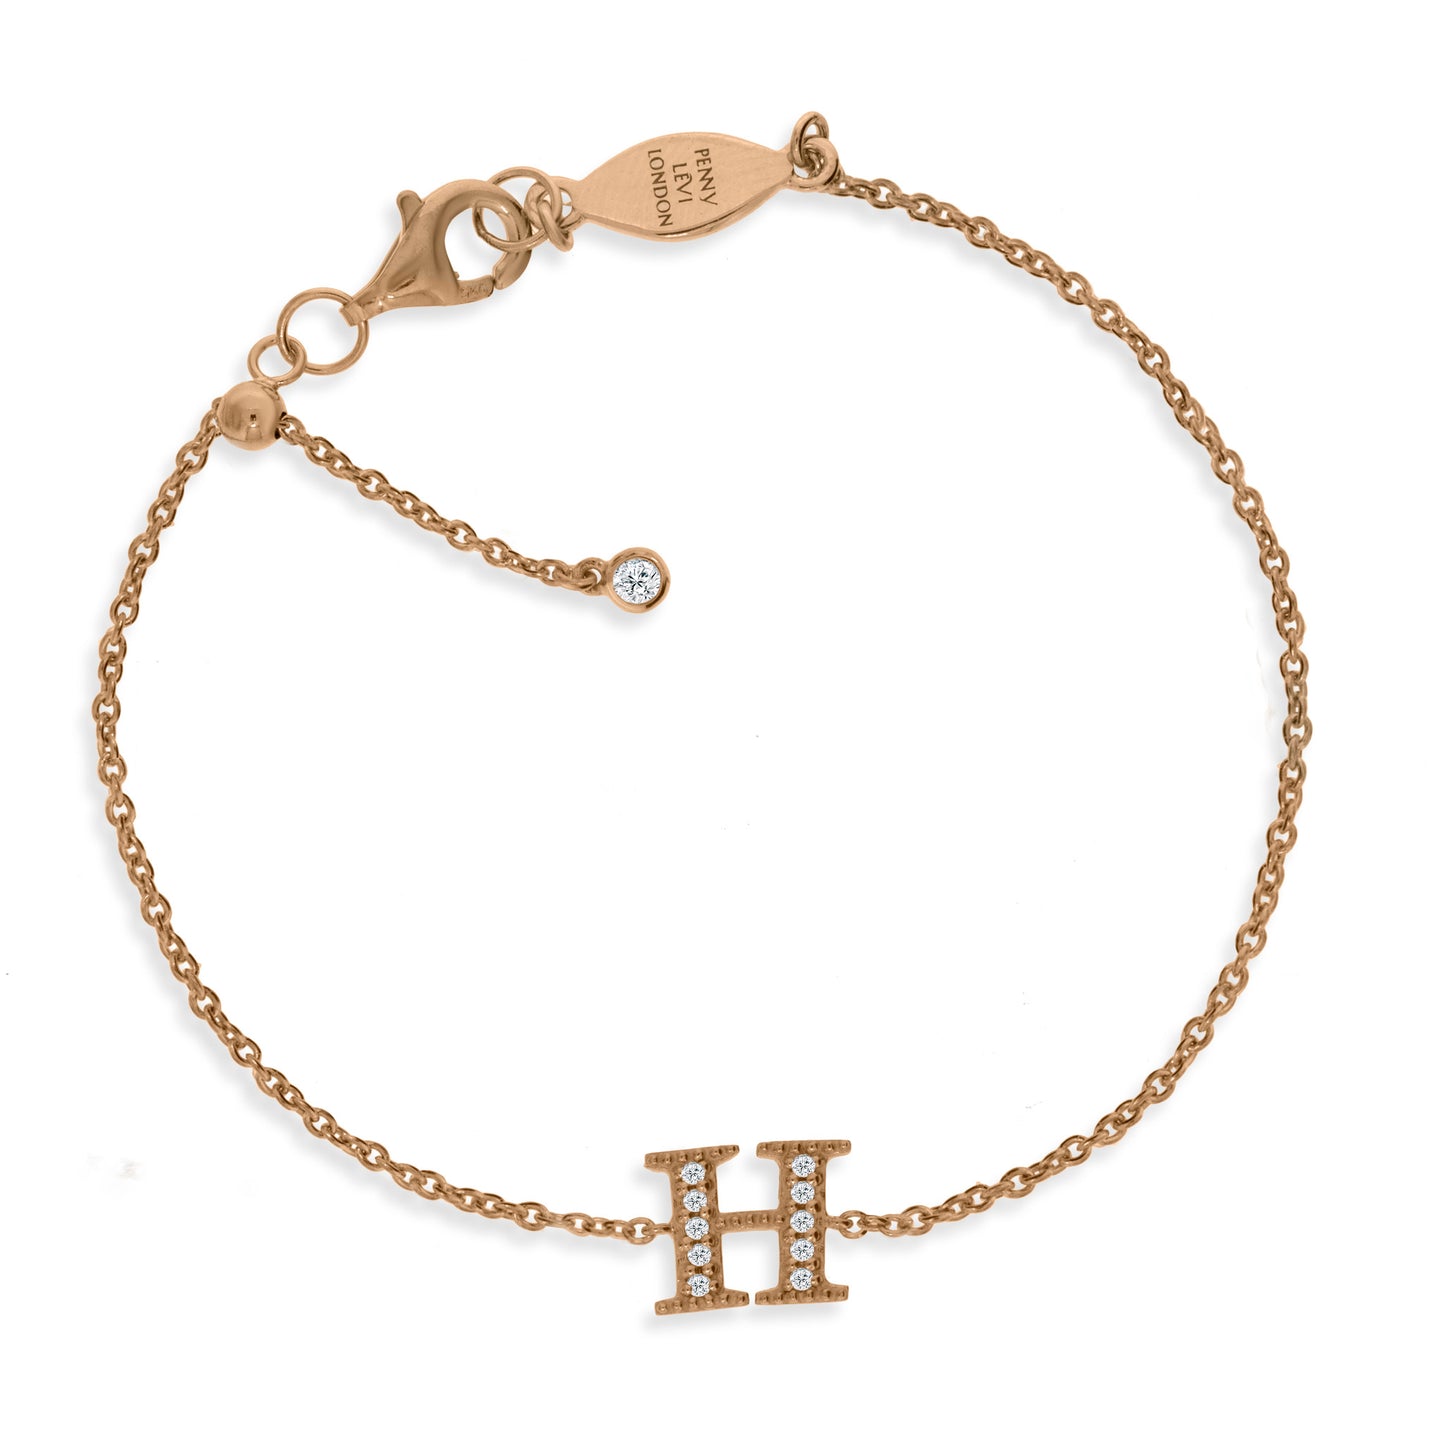 
Rose gold plated initial bracelet with cubic zirconia on a silver chain with adjustable sliding size adapter.

